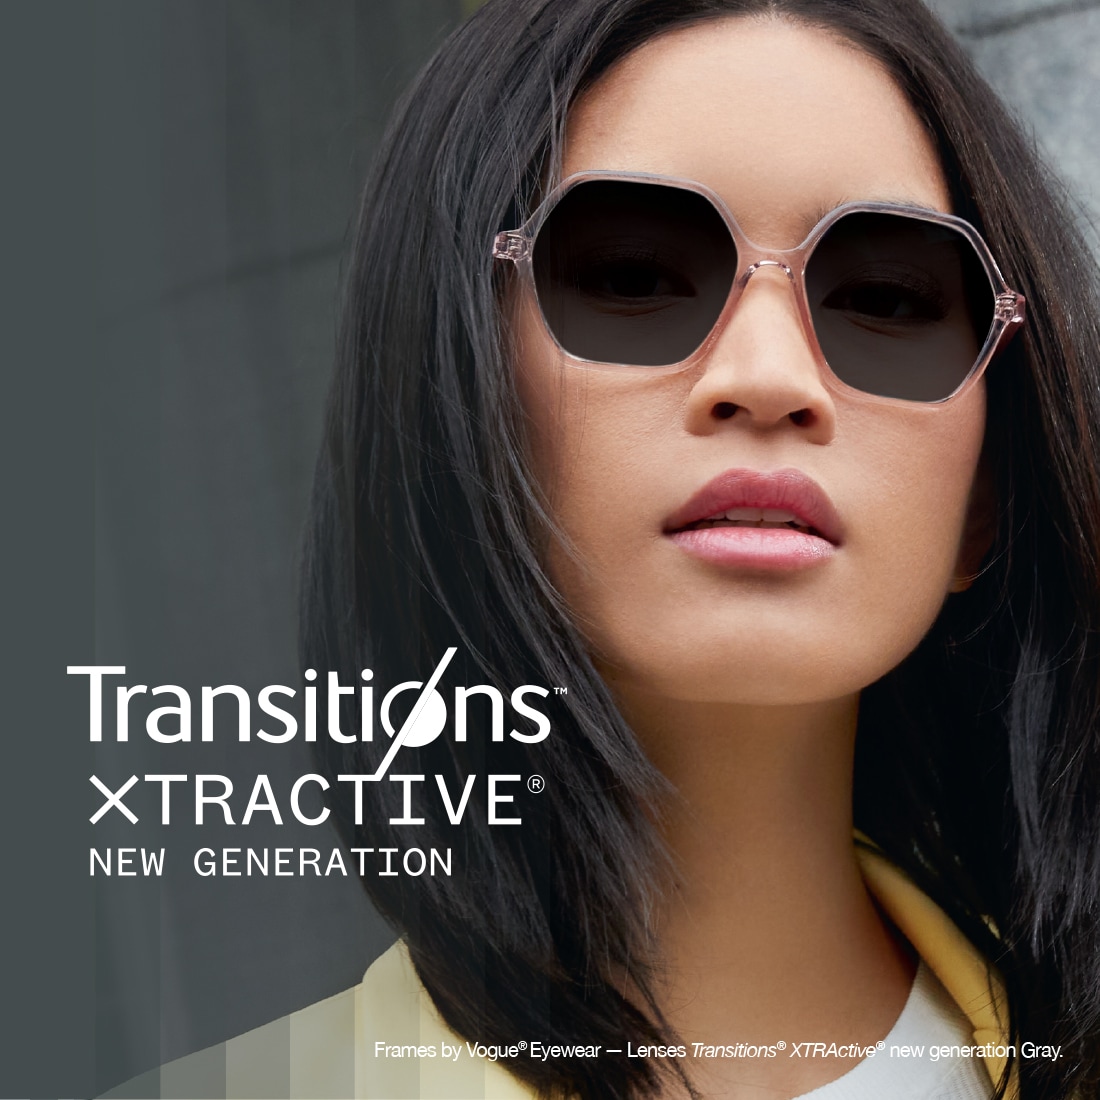 https://media.lenscrafters.com/2022/PLP/Transitions_Update/PLP_Elevated_Xtractive.jpg